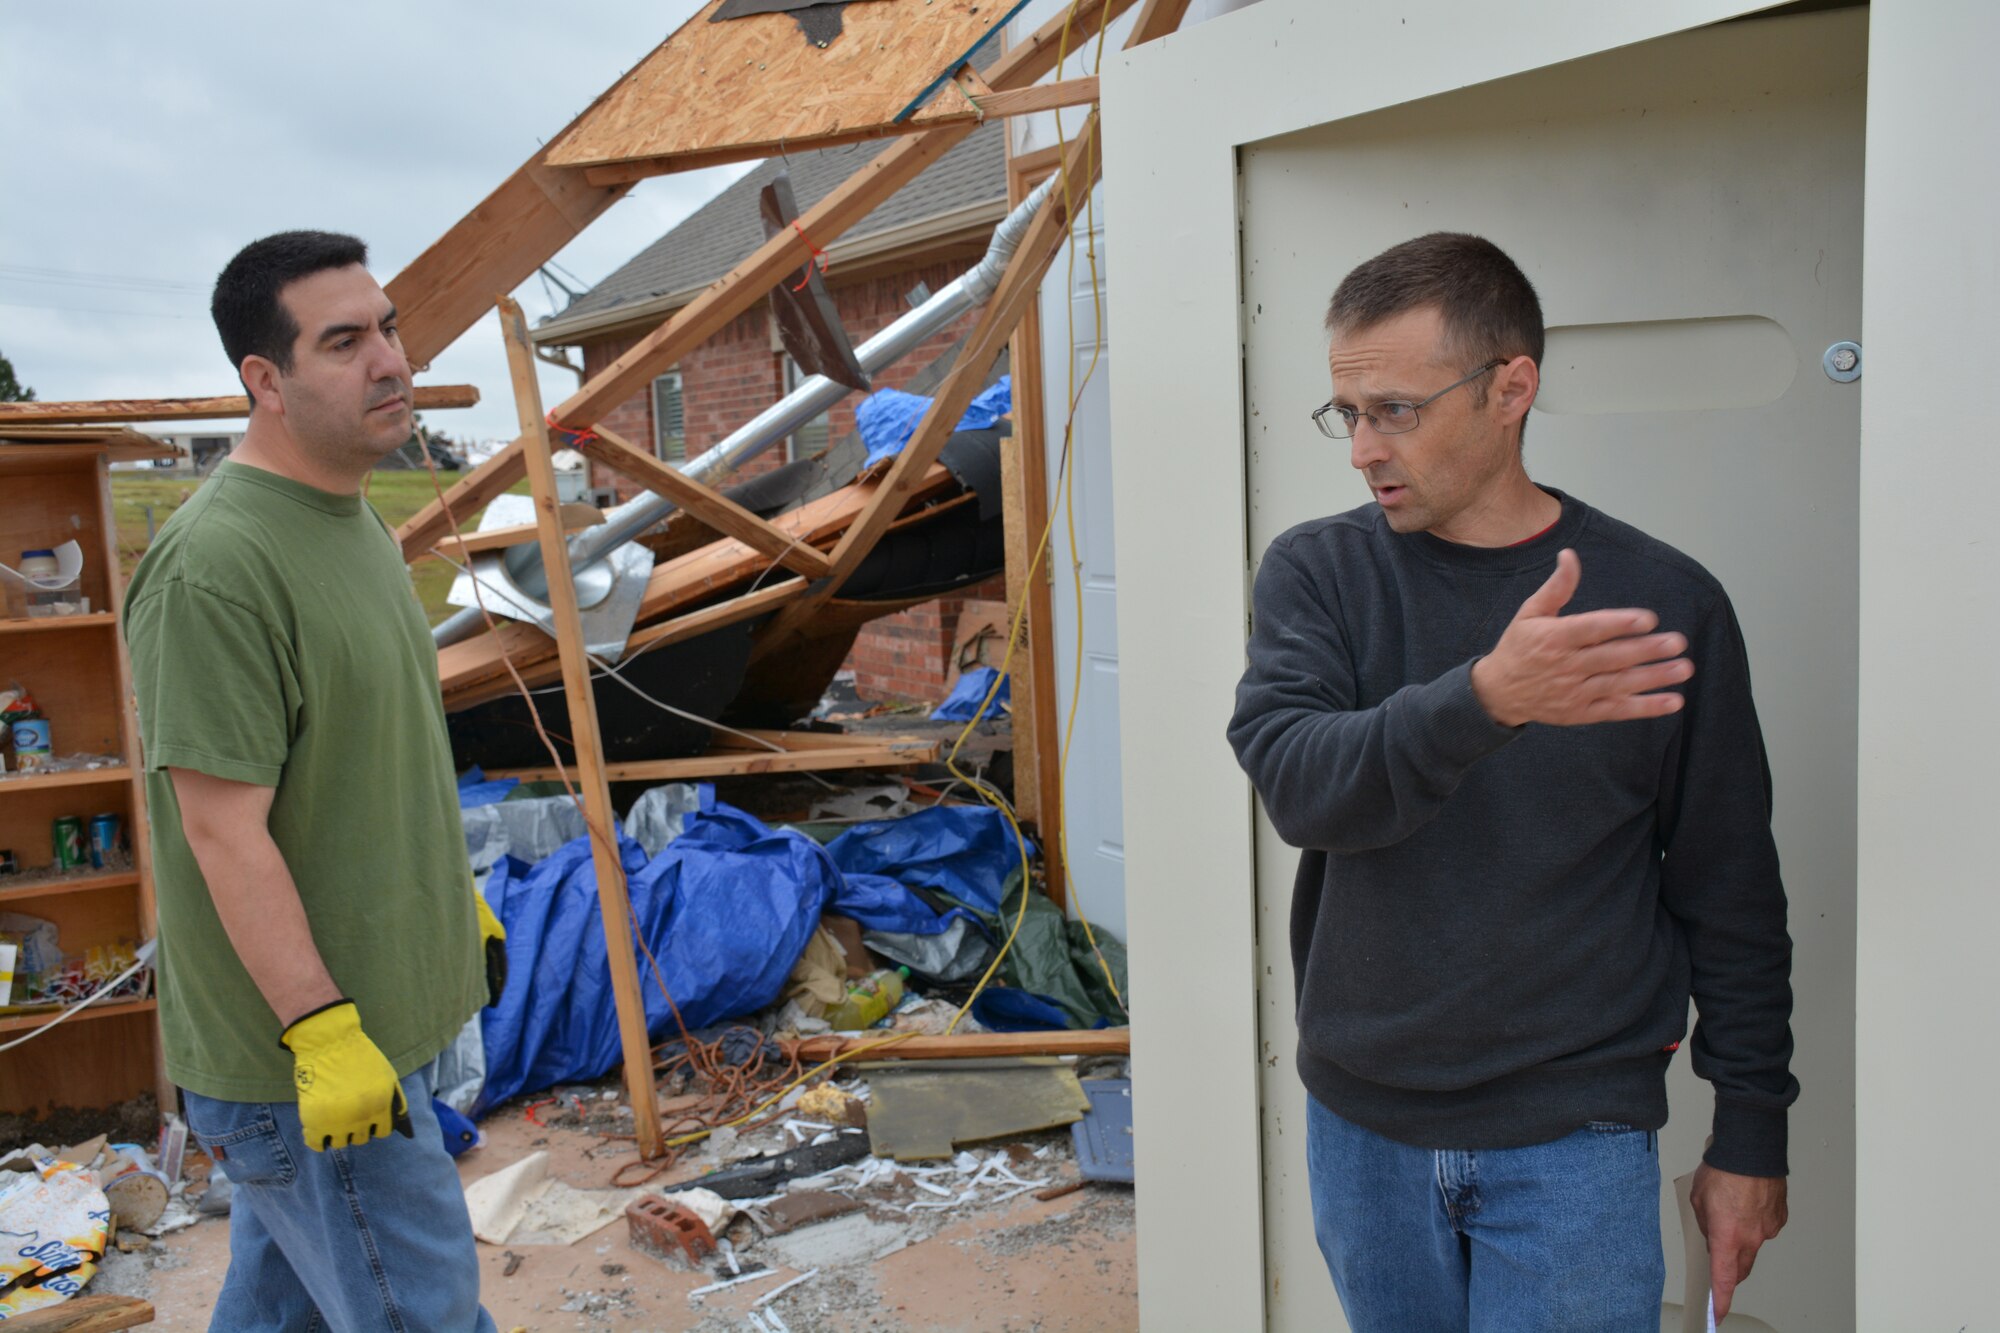 Curtis Swift, right, goes over what assistance he needs with Tech. Sgt. Joshua Tilse in getting debris cleared off his property in the aftermath of the May 6 tornado that hit his neighborhood in Bridge Creek. Sergeant Tilse said he’s known Mr. Swift for years and felt stepping up to be a good Wingman “just seemed like the right thing to do.” (Air Force photo by Darren D. Heusel/Released)